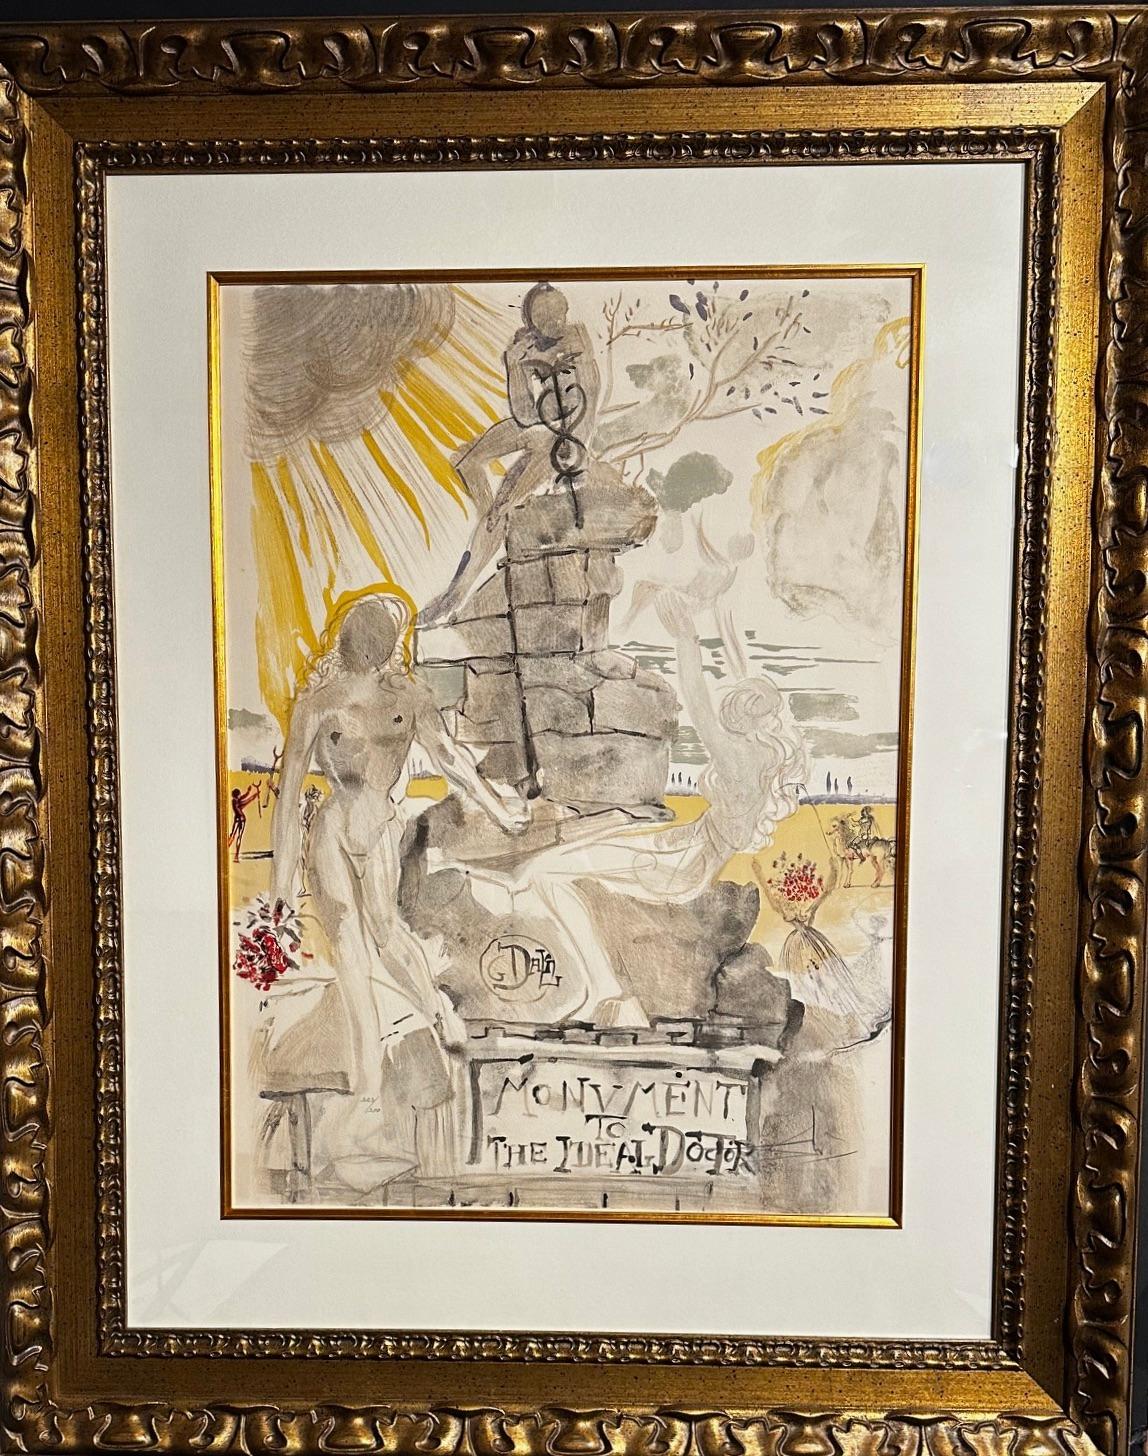 Monument To The Ideal Doctor - Brown Figurative Print by Salvador Dalí